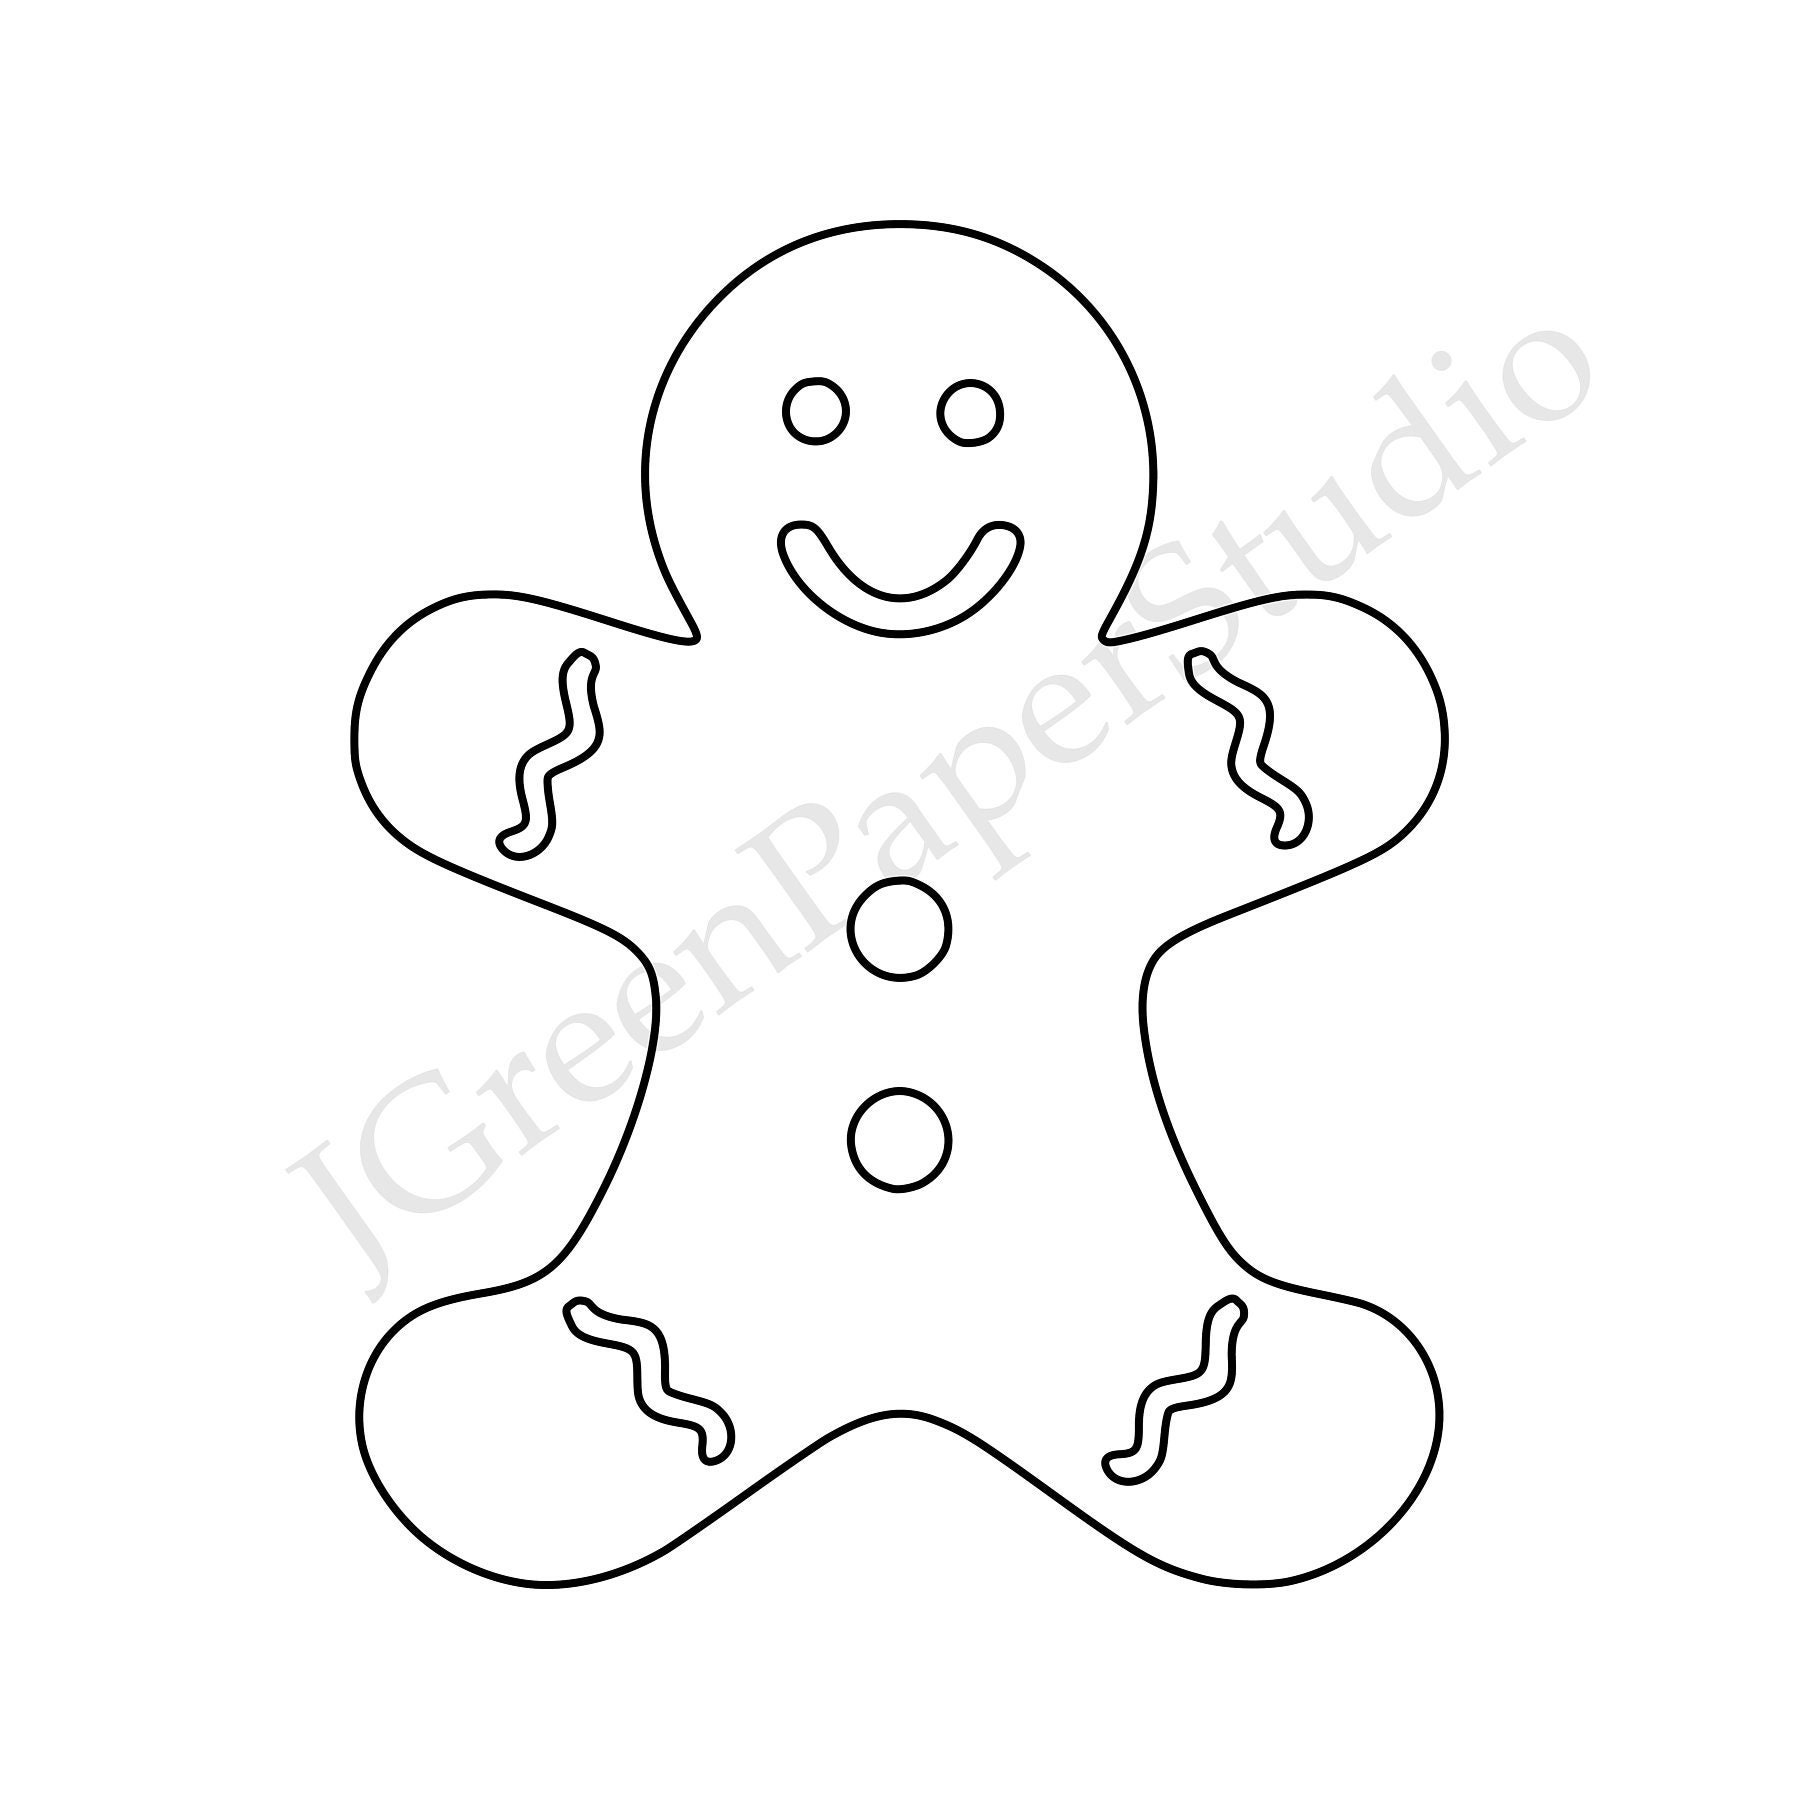 gingerbread man drawing step by step